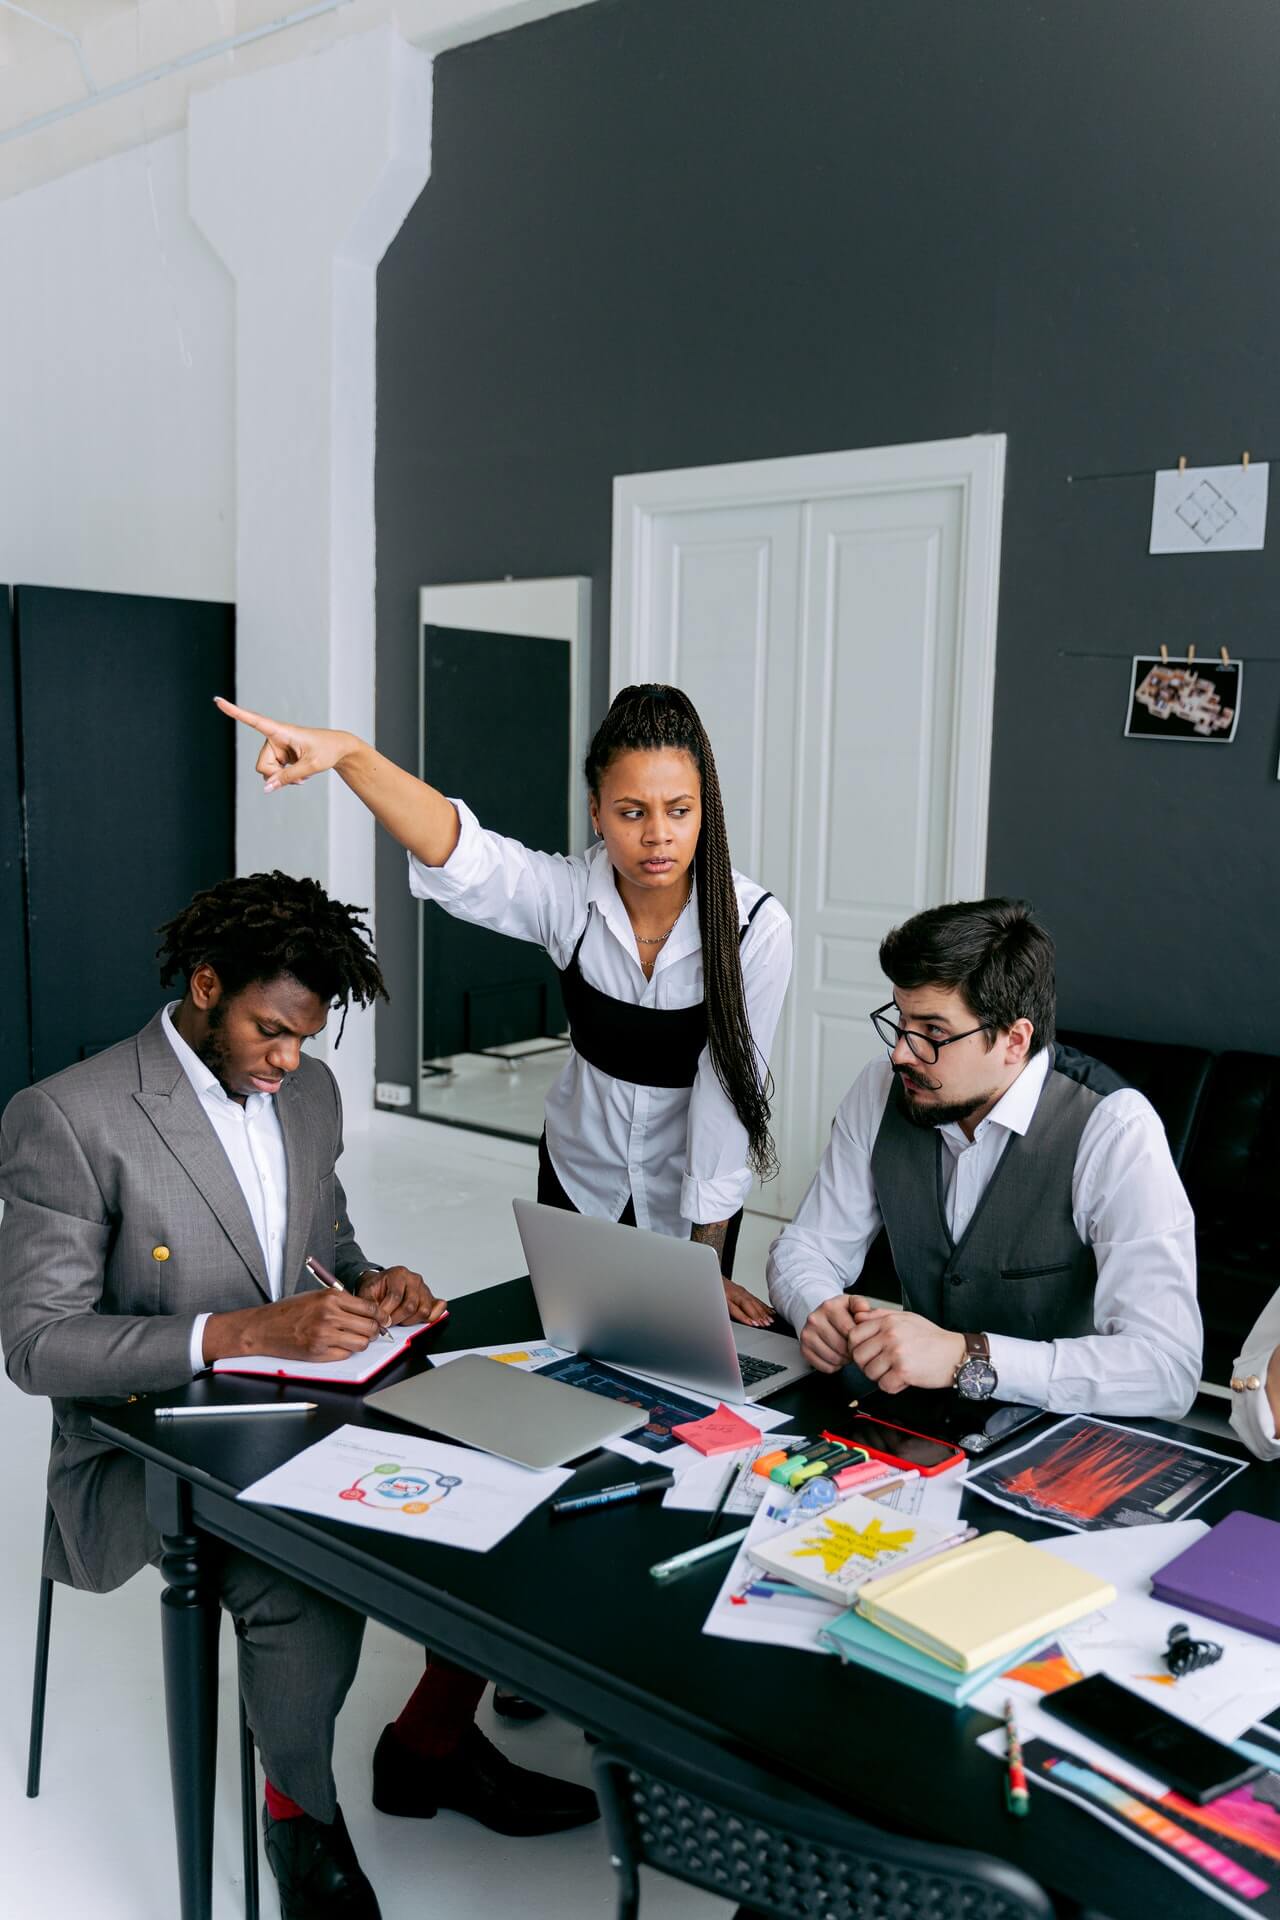 angry woman boss pointing while male employees look uncomfortable